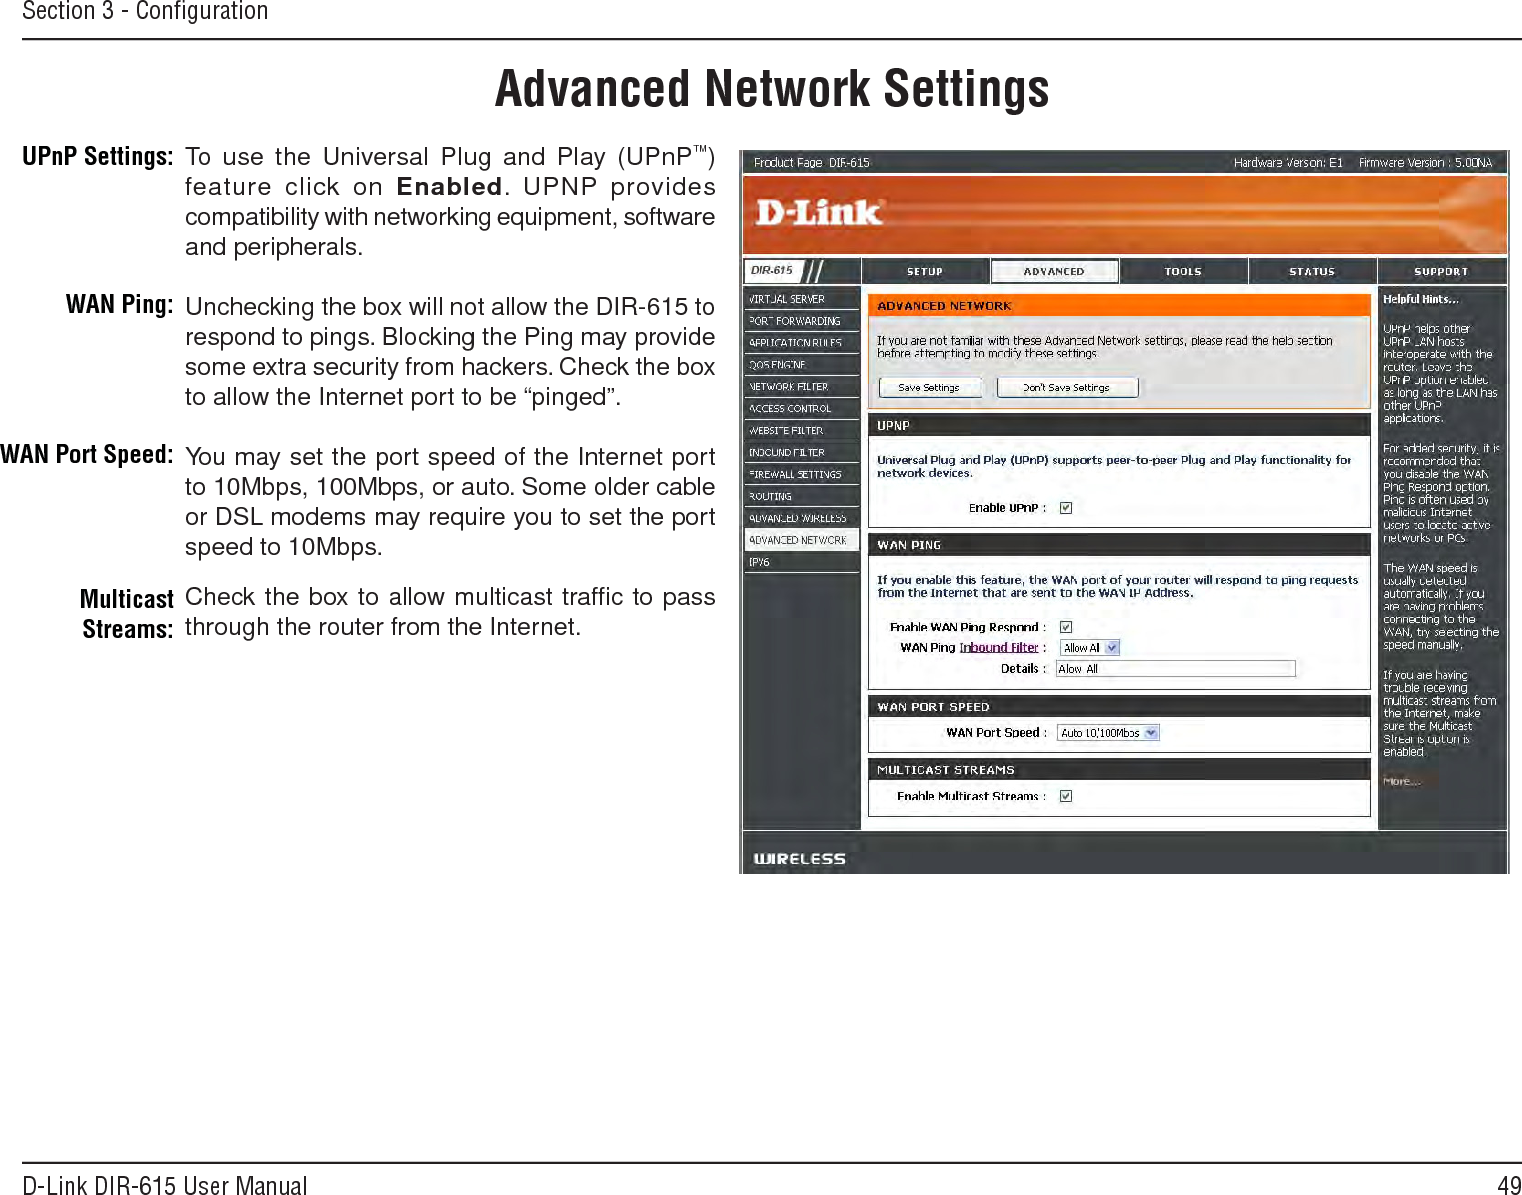 49D-Link DIR-615 User ManualSection 3 - ConﬁgurationUPnPInternet Ping BlockInternet Port SpeedMulticast StreamsTo use the Universal Plug and Play (UPnP™) feature click on Enabled. UPNP provides compatibility with networking equipment, software and peripherals.Unchecking the box will not allow the DIR-615 to respond to pings. Blocking the Ping may provide some extra security from hackers. Check the box to allow the Internet port to be “pinged”.You may set the port speed of the Internet port to 10Mbps, 100Mbps, or auto. Some older cable or DSL modems may require you to set the port speed to 10Mbps.Check the box to allow multicast trafﬁc to pass through the router from the Internet.UPnP Settings:WAN Ping:WAN Port Speed:Multicast Streams:Advanced Network Settings